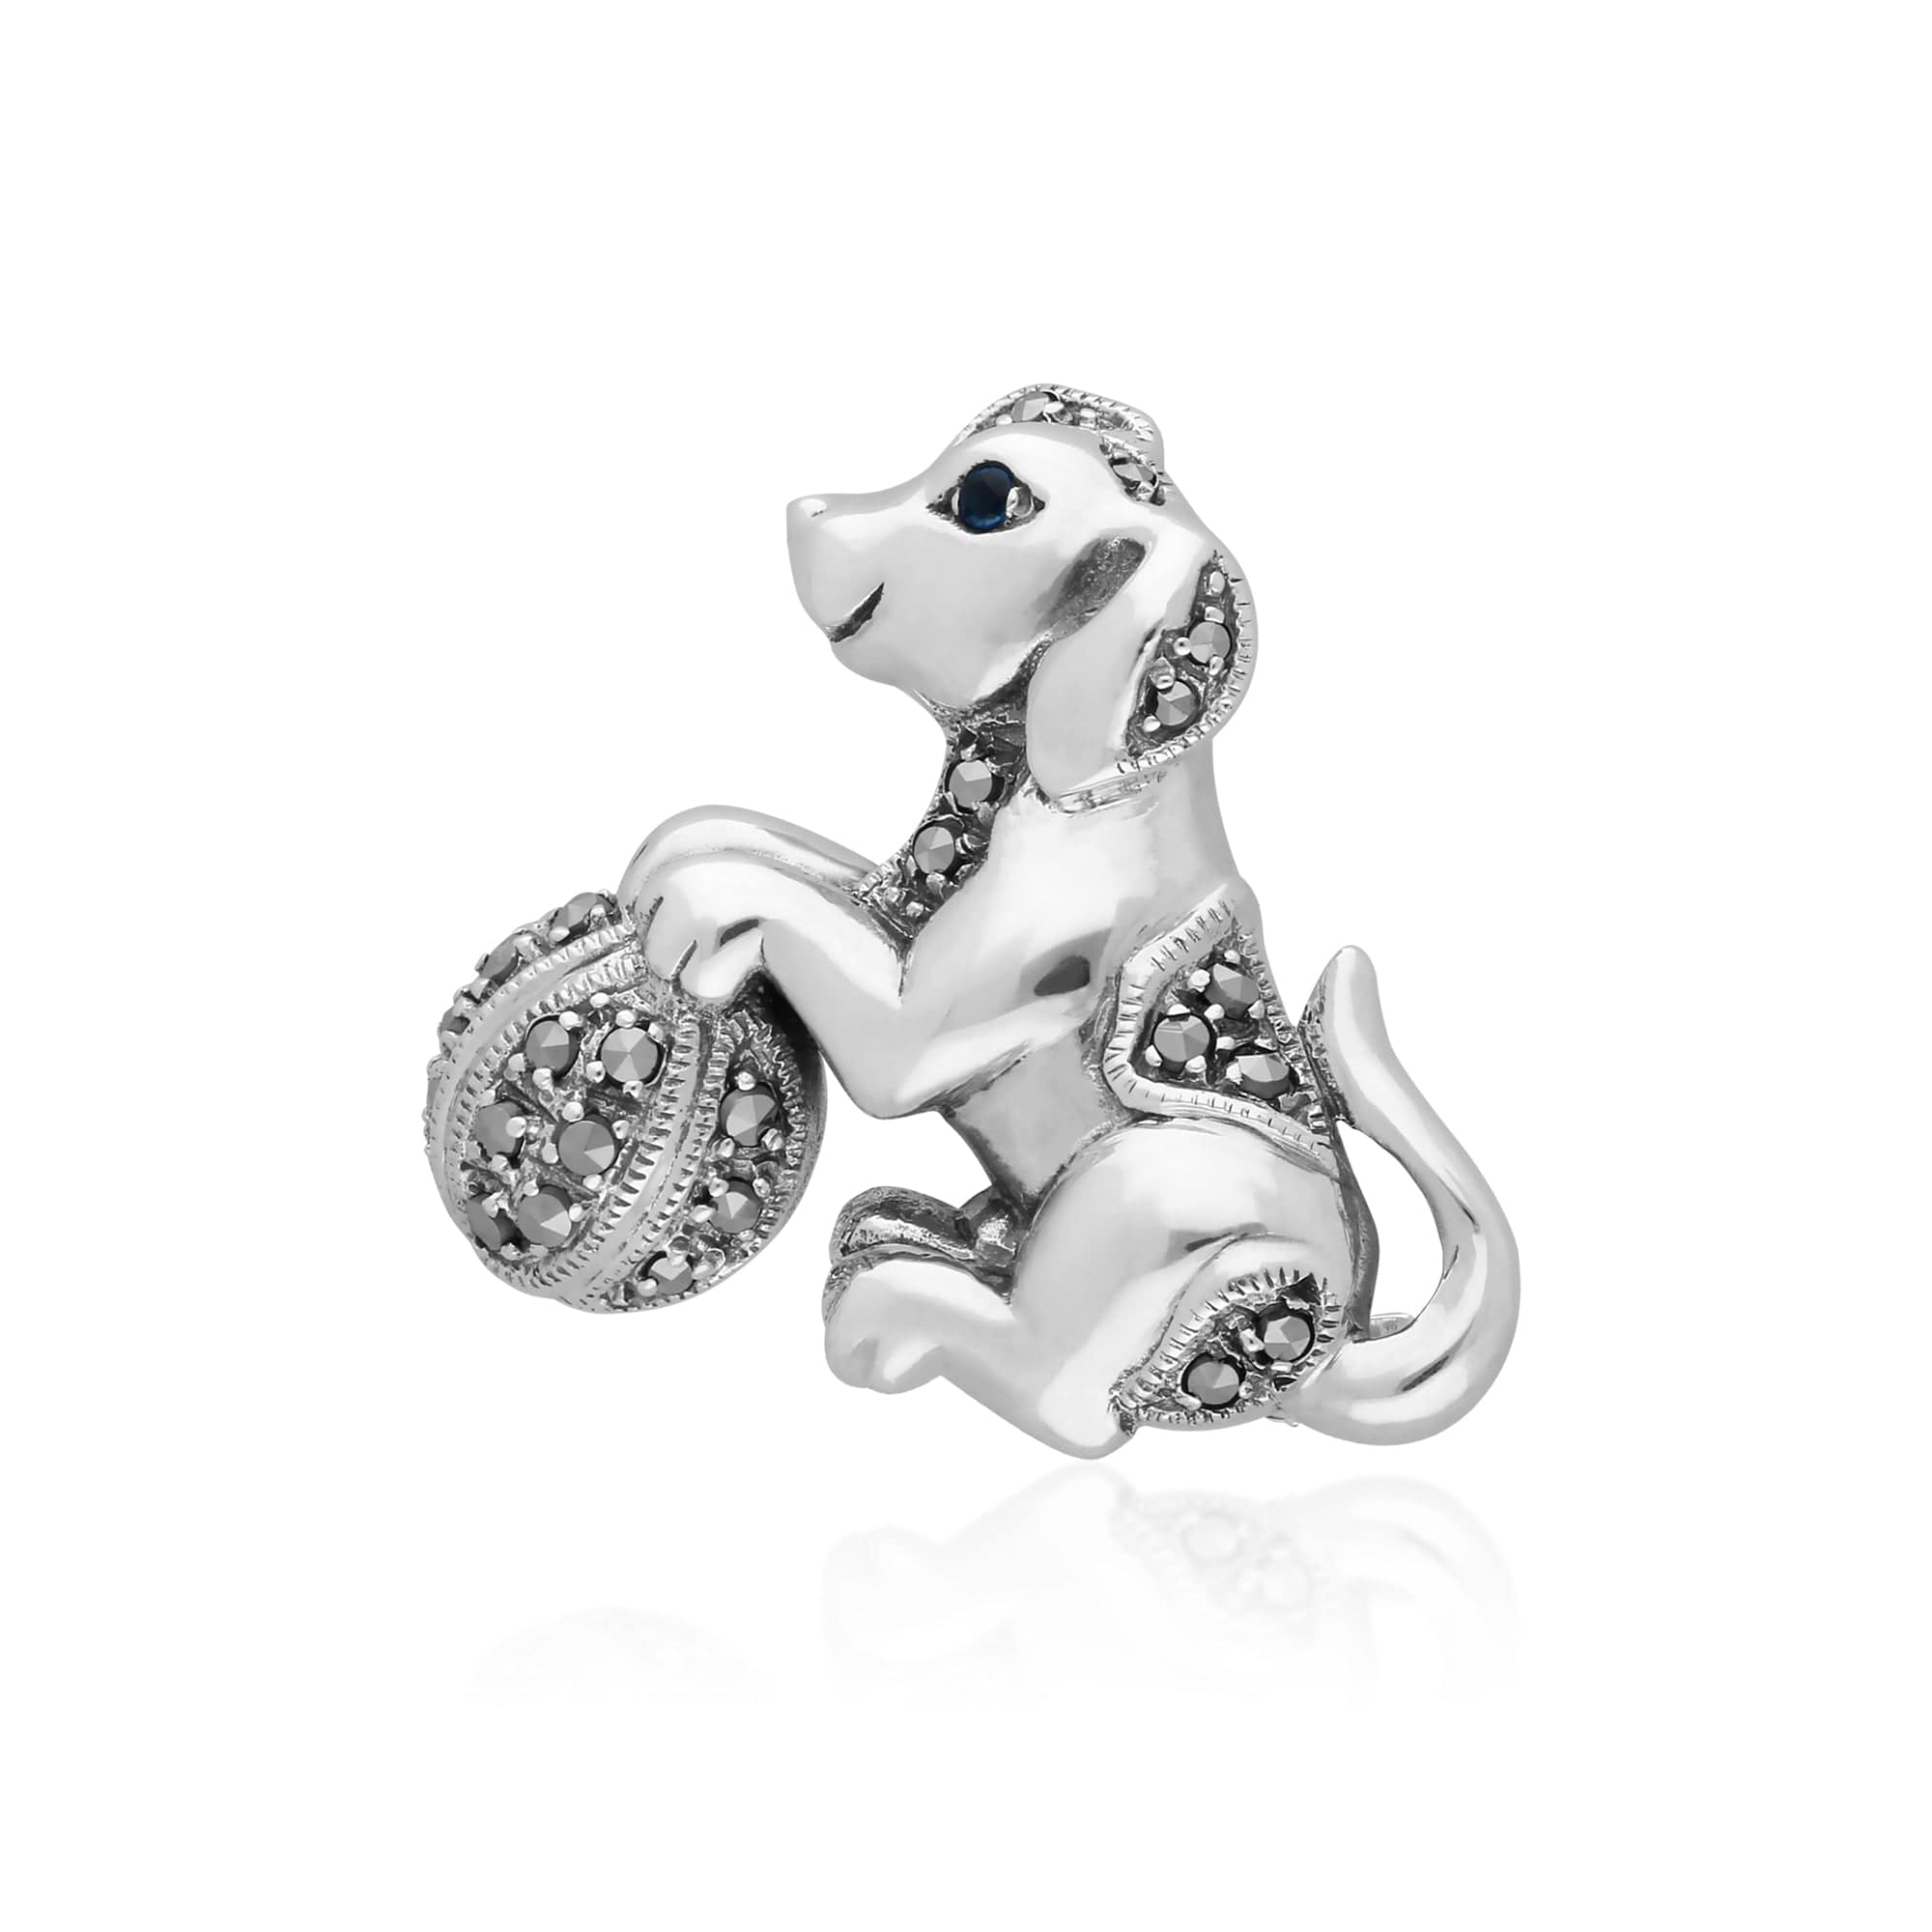 21874 Art Nouveau Round Marcasite & Sapphire Playful Dog Brooch in 925 Sterling Silver 1